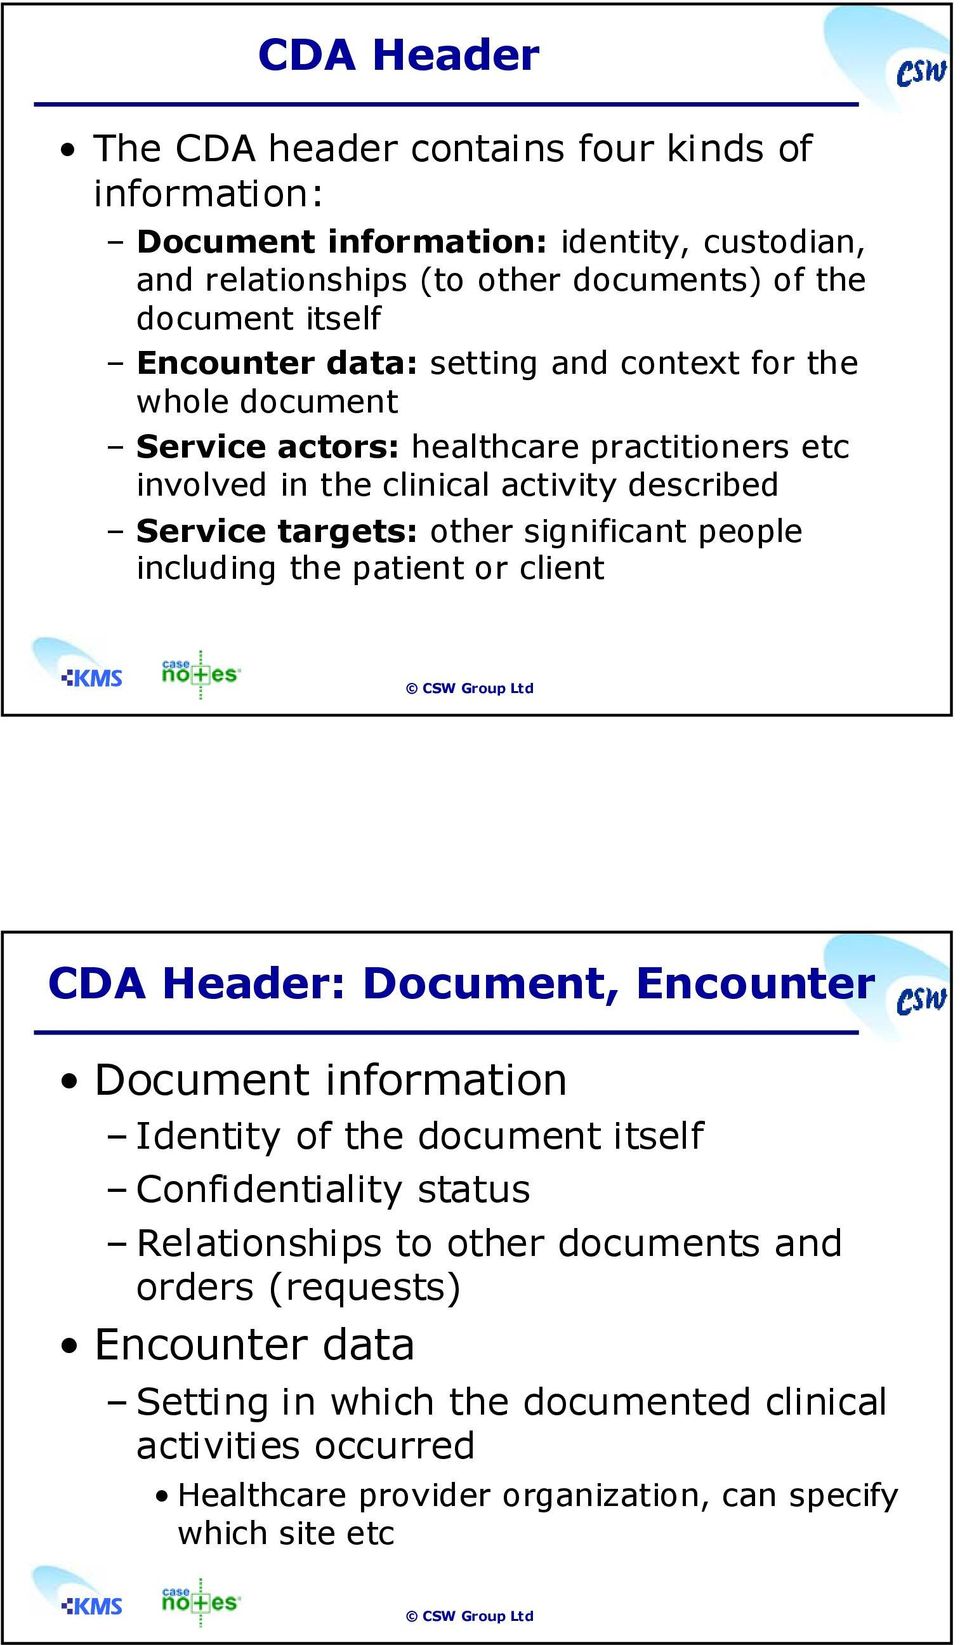 significant people including the patient or client KMS CDA Header: Document, Encounter Document information Identity of the document itself Confidentiality status